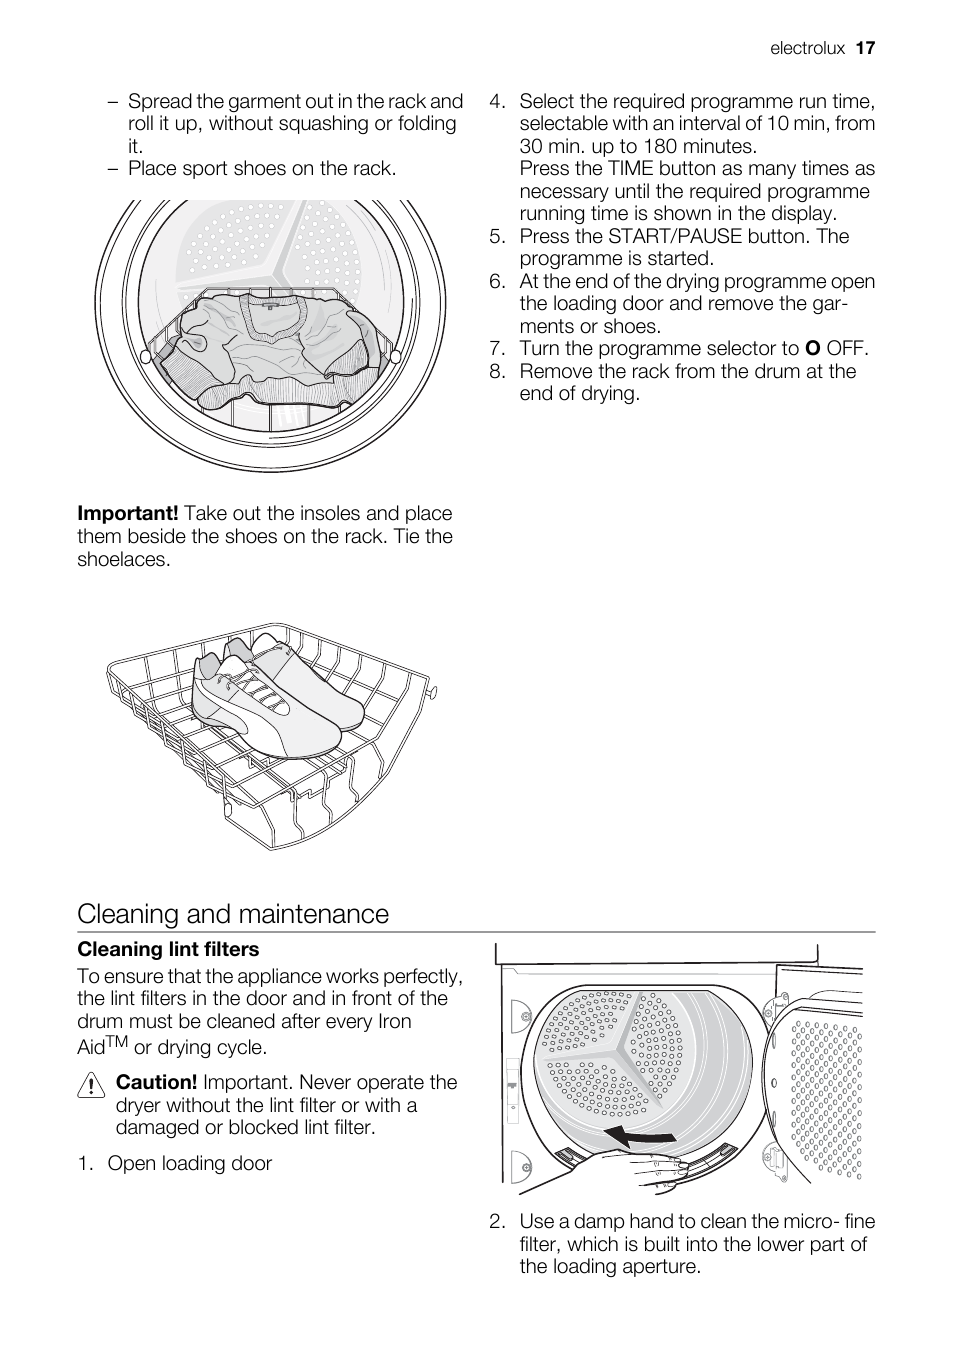 Cleaning and maintenance | Electrolux EDI97170W User Manual | Page 17 / 28